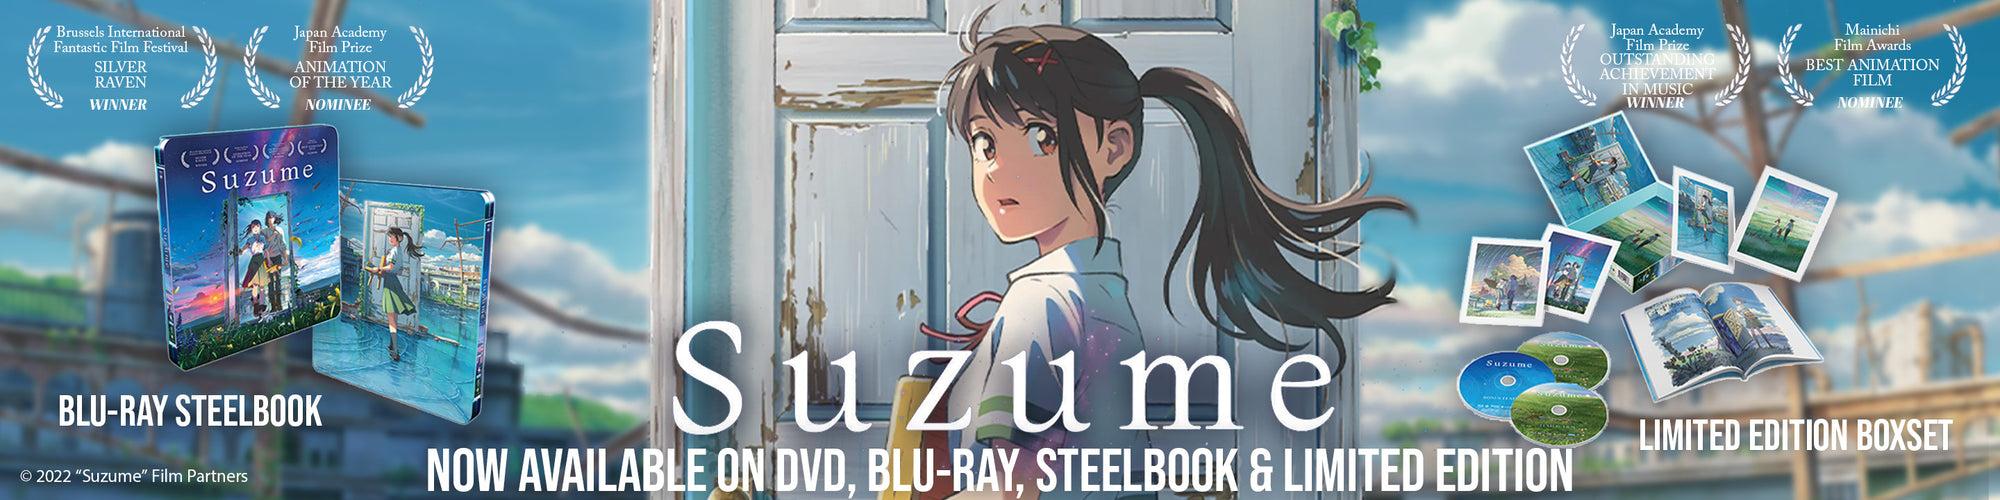 Suzume is now available on DVD, Blu-ray, Steelbook and Limited Edition Boxset